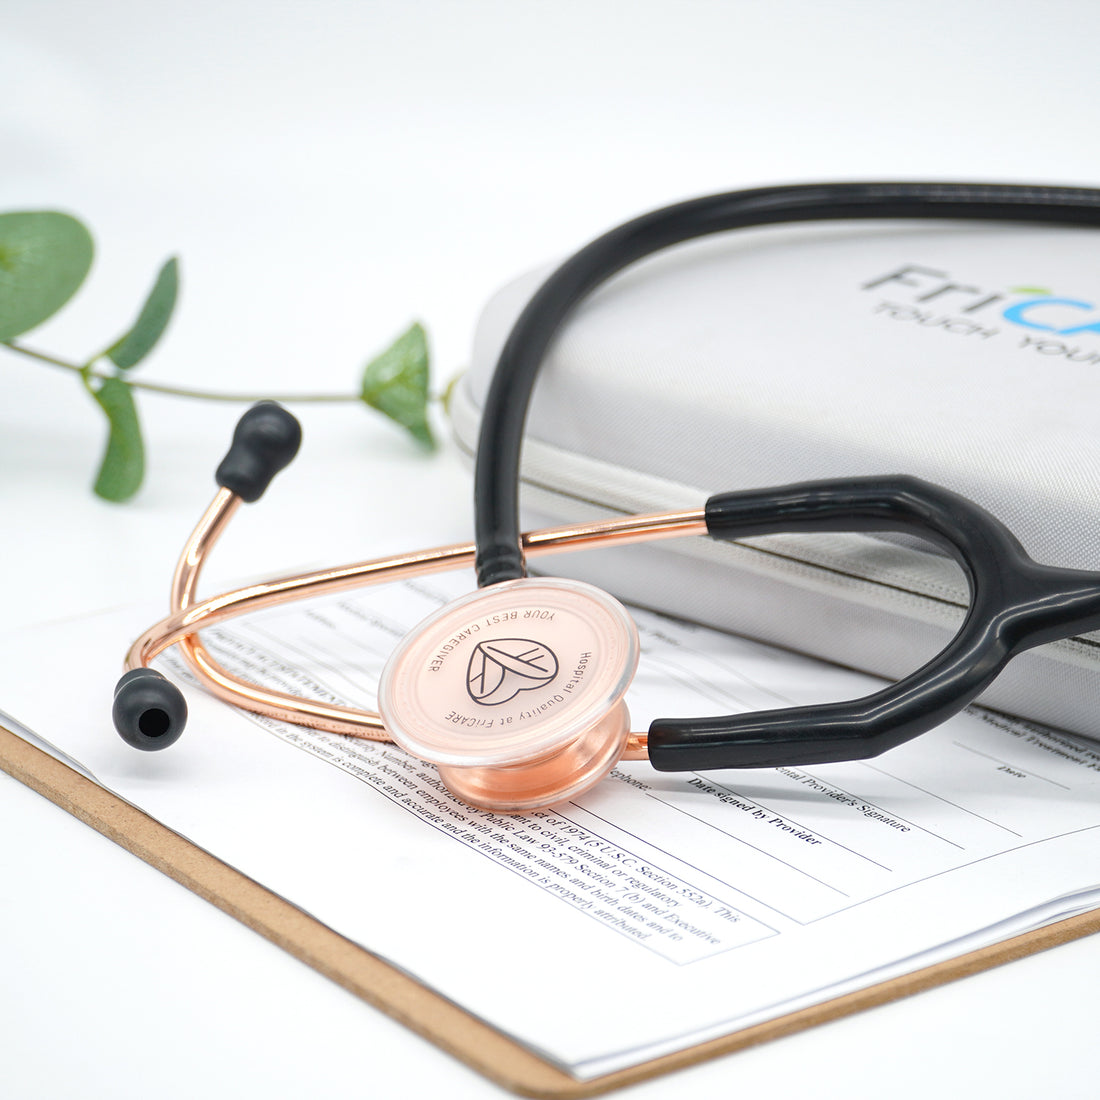 ROSE GOLD STETHOSCOPE: Order Today and Feel the Luxury!